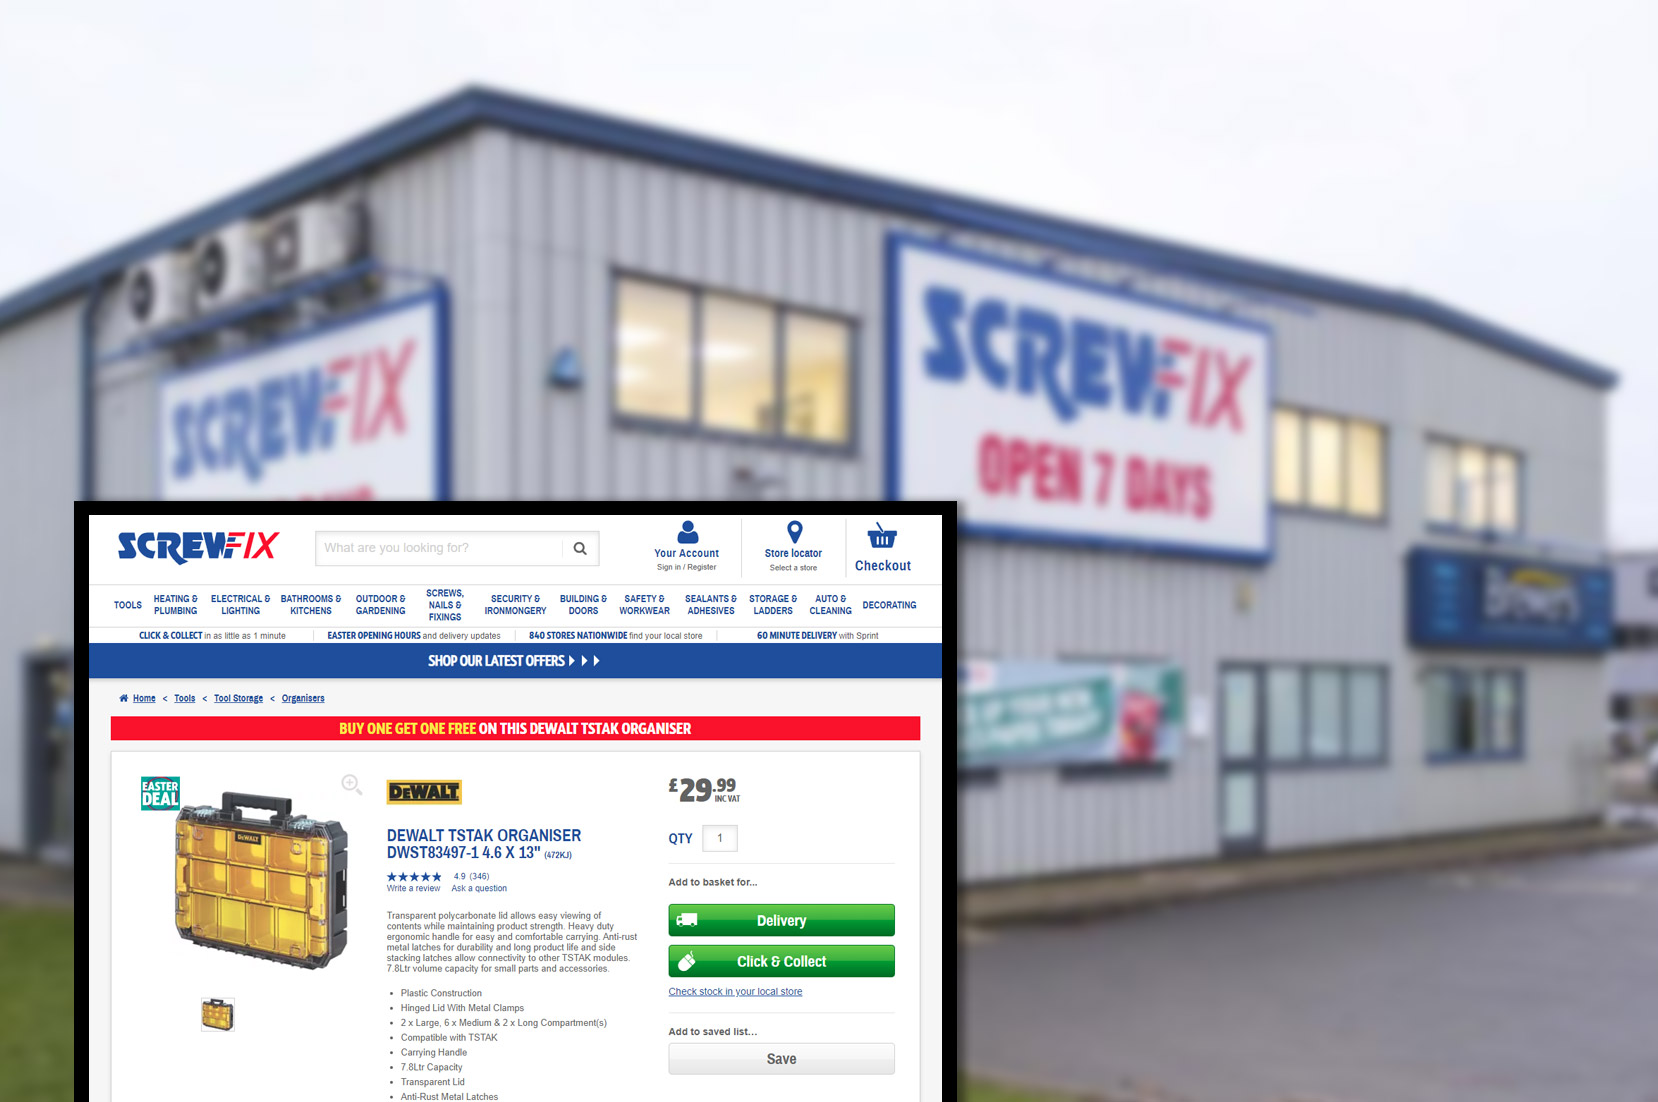 screwfix-comproduct-pricing-information-and-image-scraping-services